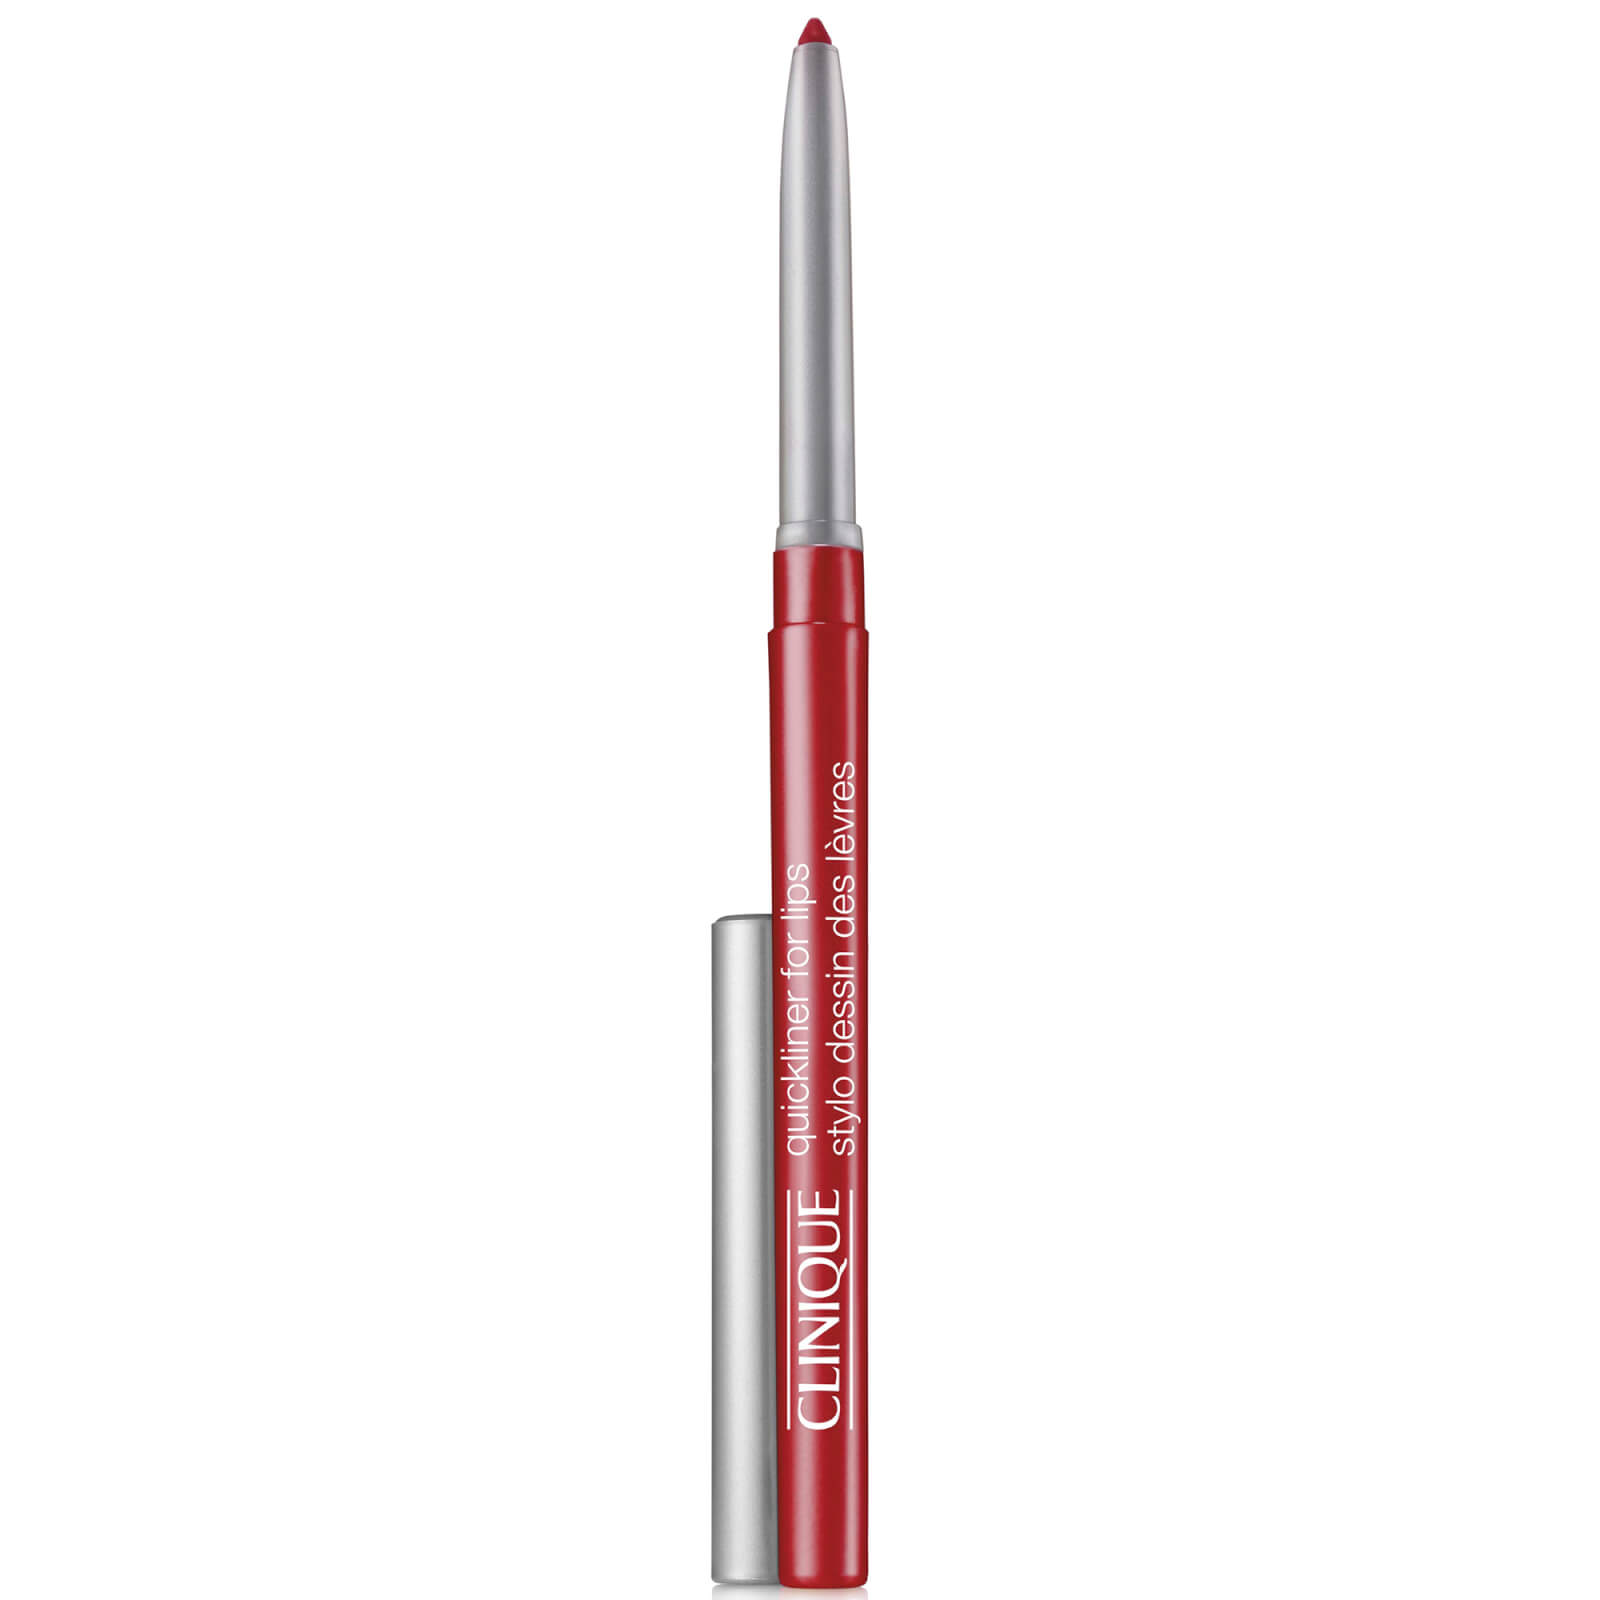 Clinique Quickliner for Lips 0.3g (Various Shades) - Intense Cranberry